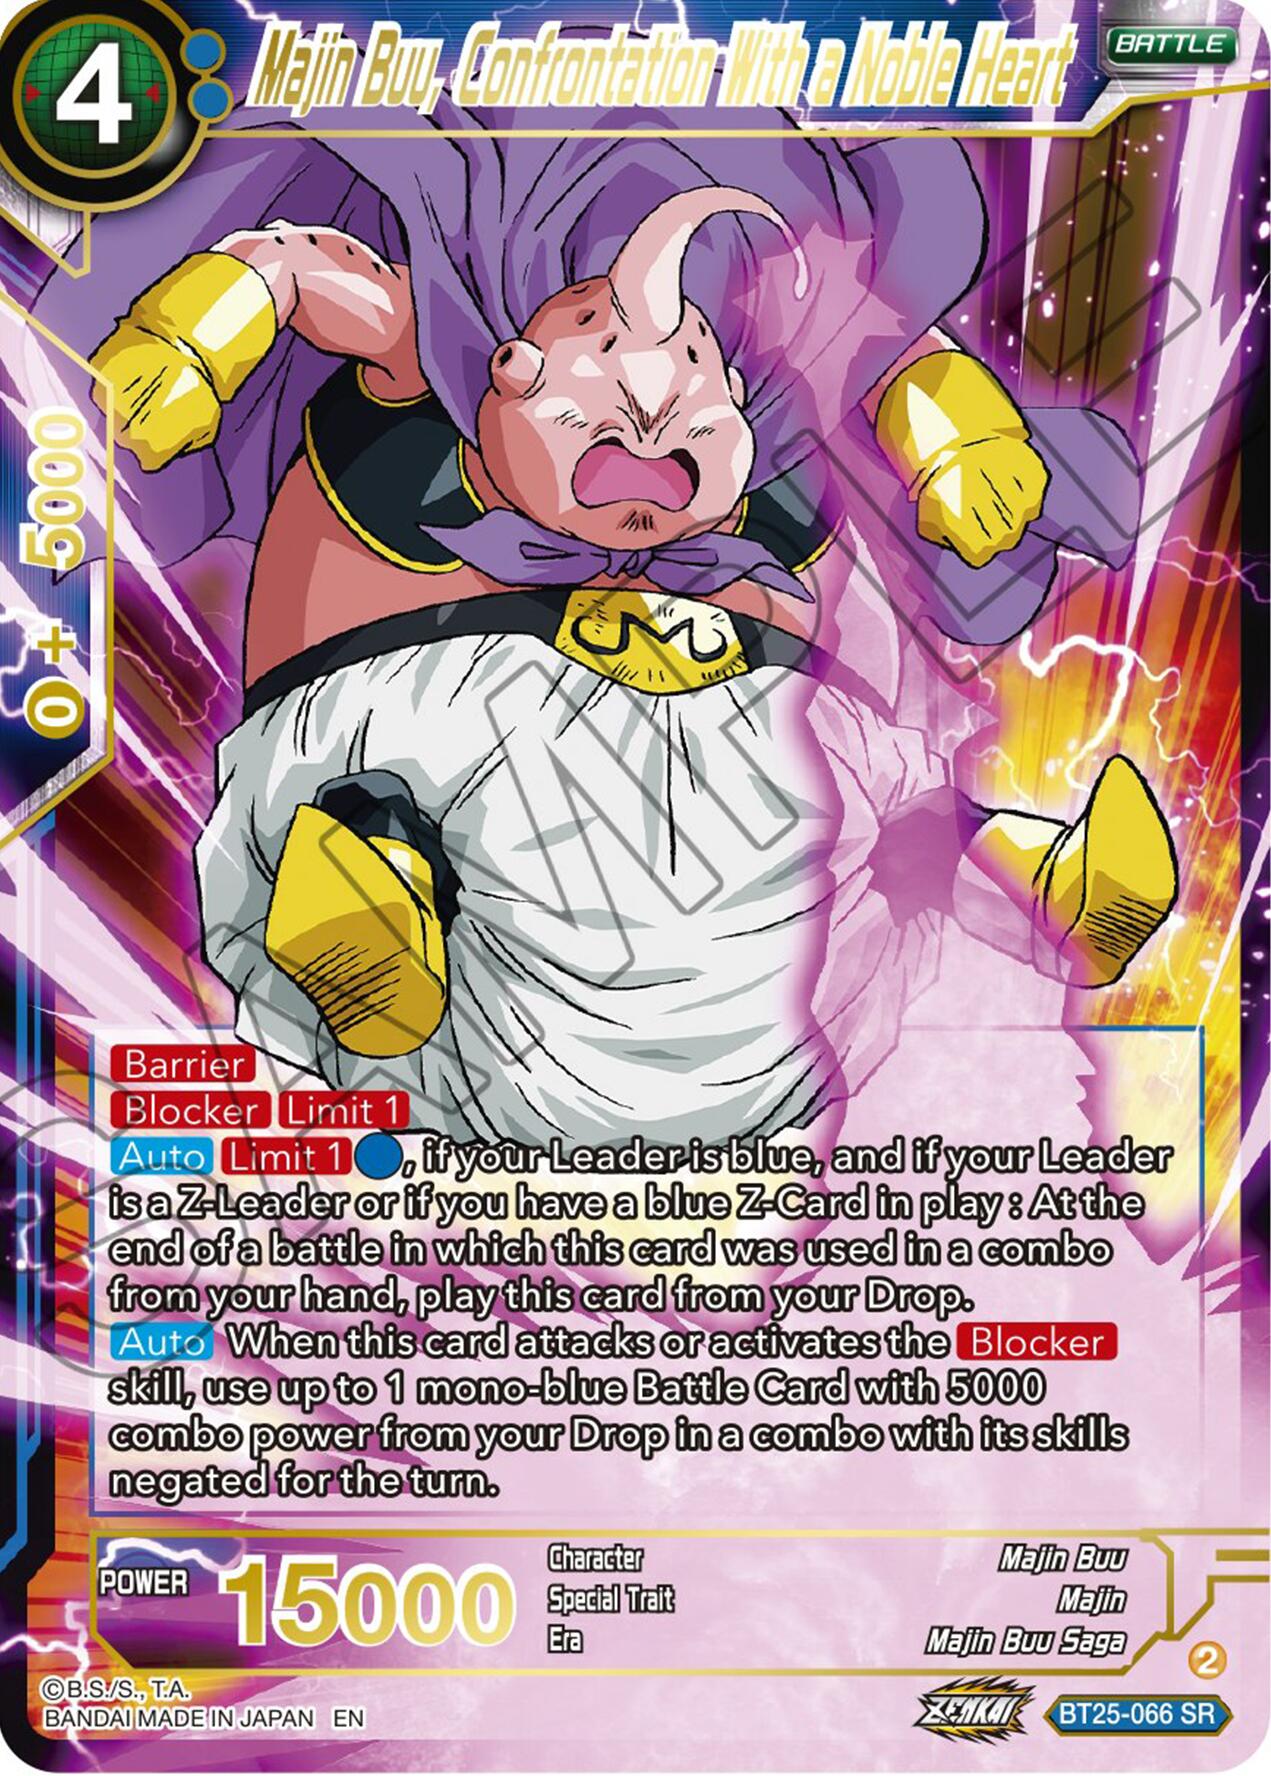 Majin Buu, Confrontaliter With a Mobile Heat (BT25-066) [Legend of the Dragon Balls] | North Valley Games